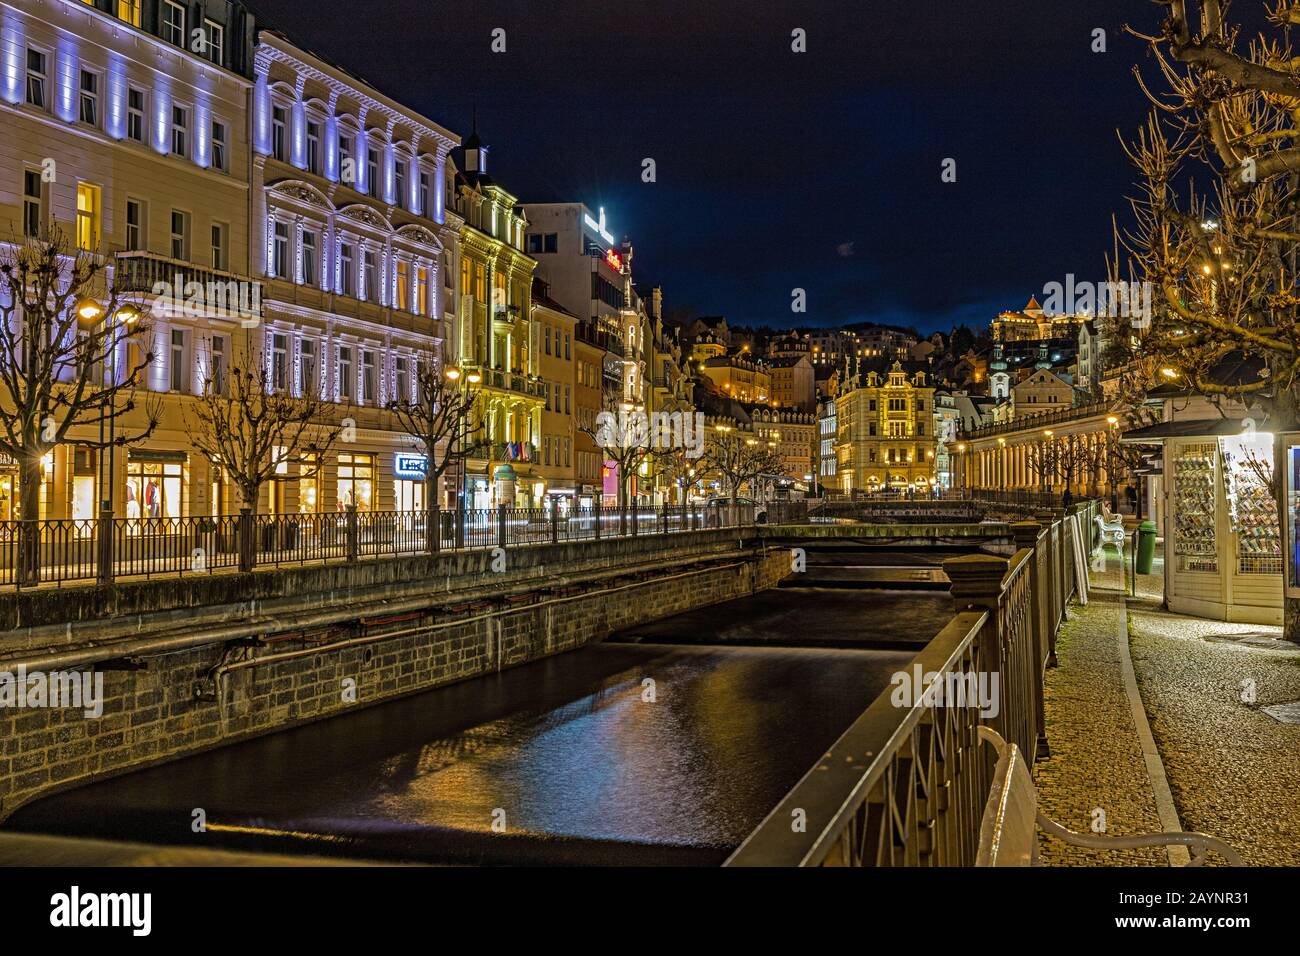 town center of Karlovy vary in the Czech Republic Stock Photo